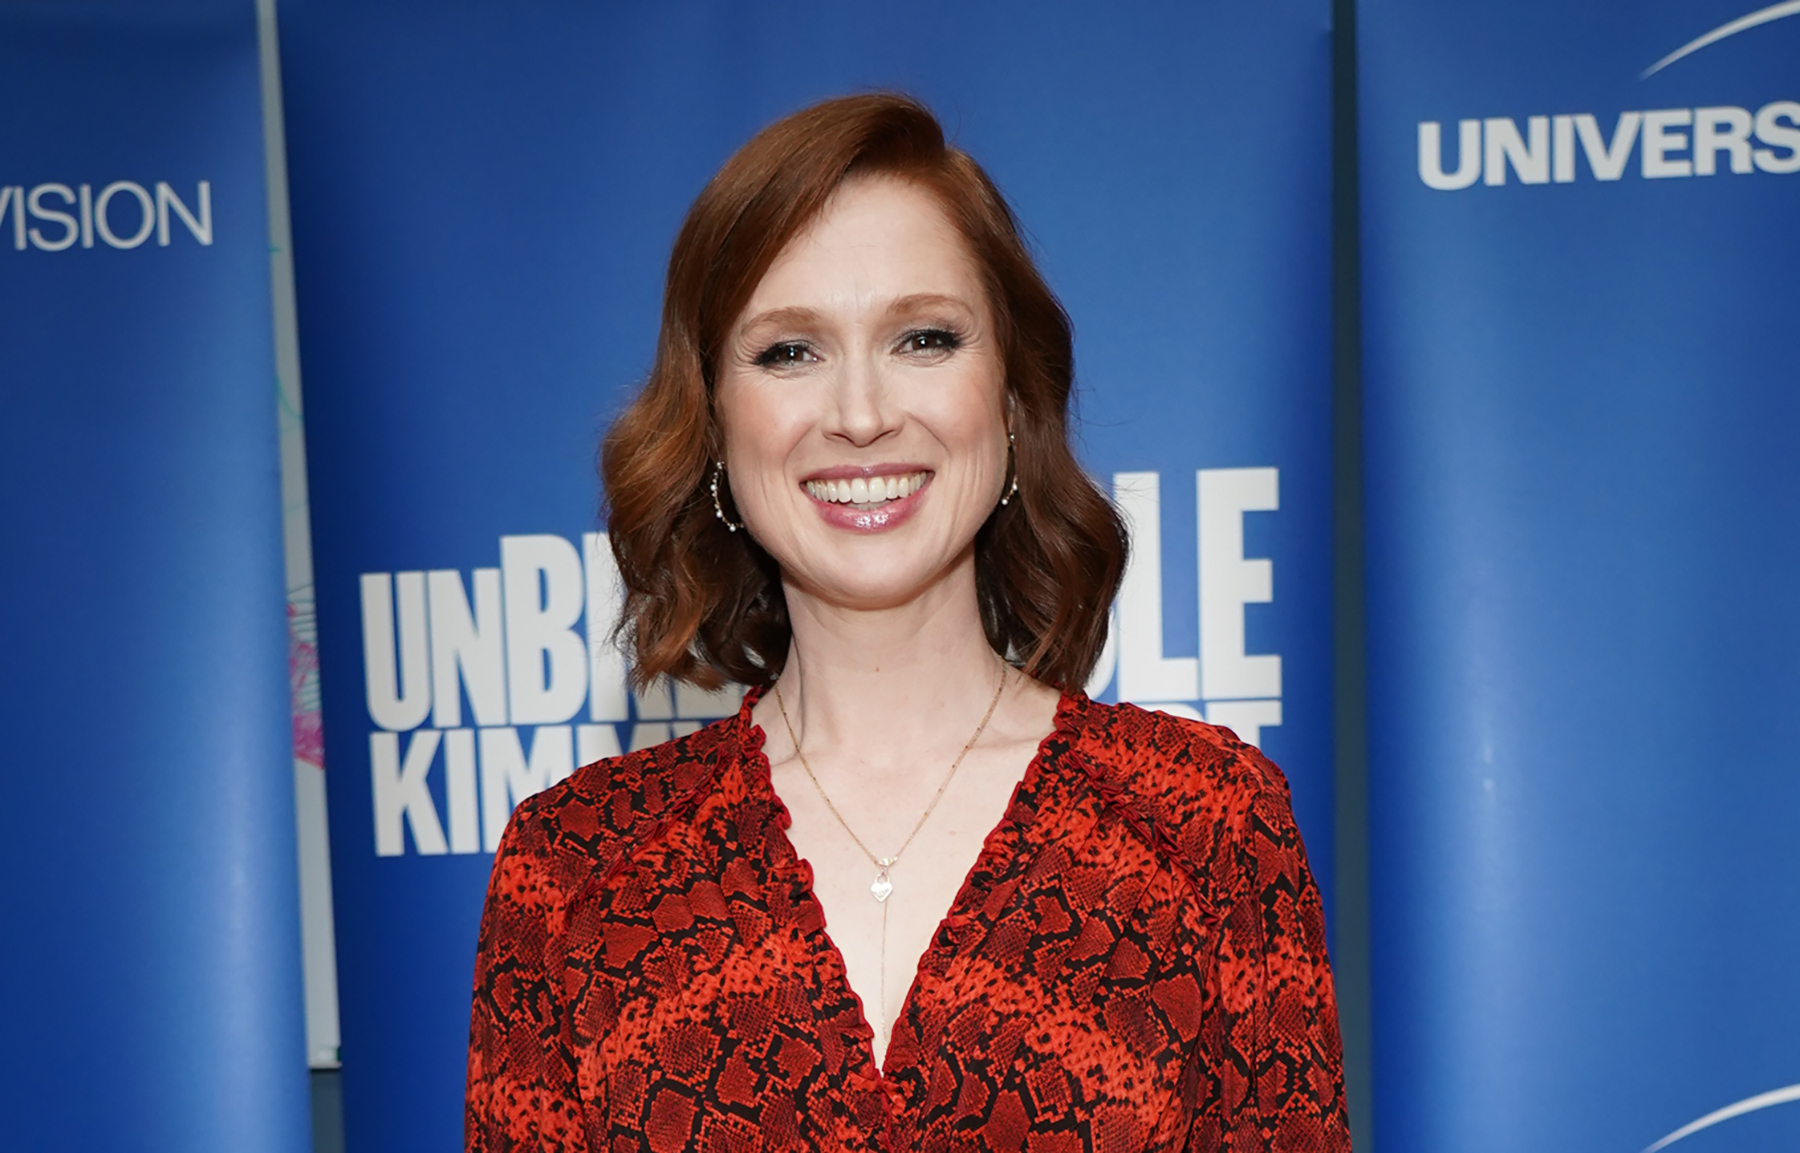 Ellie Kemper S Past As Queen Of The Veiled Prophet Ball Stirs Up Controversy Al Com